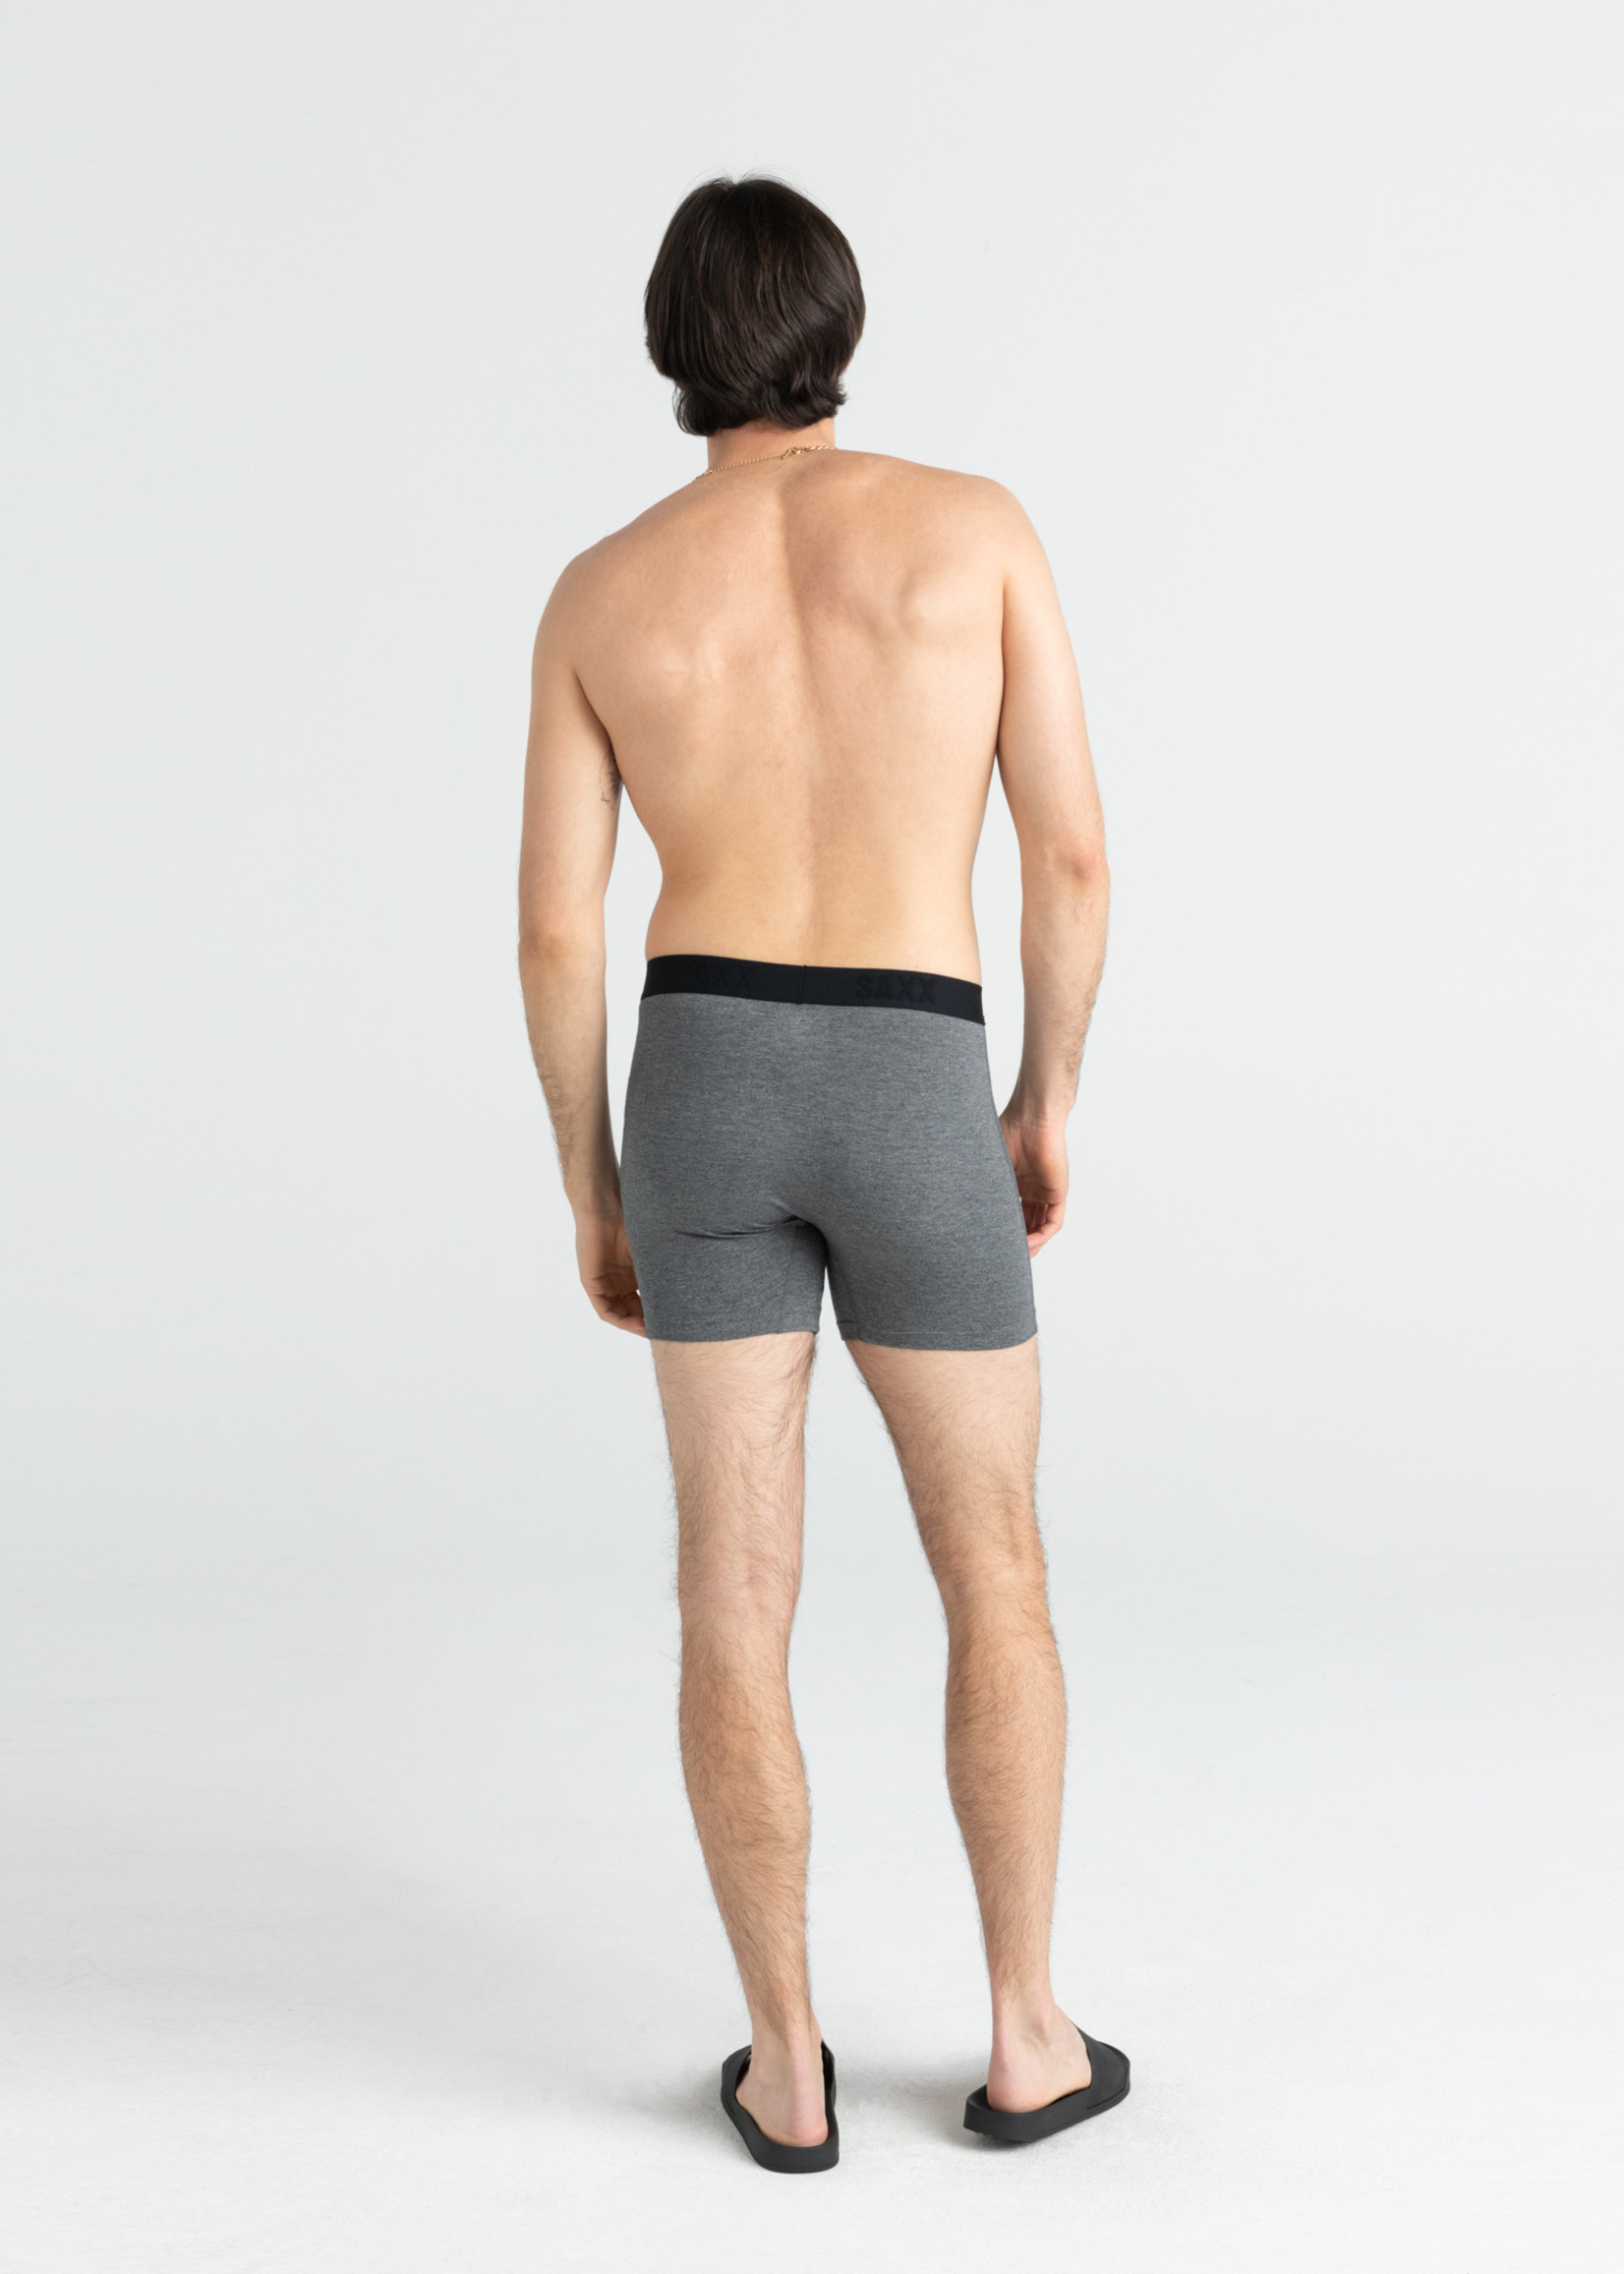 Saxx Ultra Boxer Brief with Fly